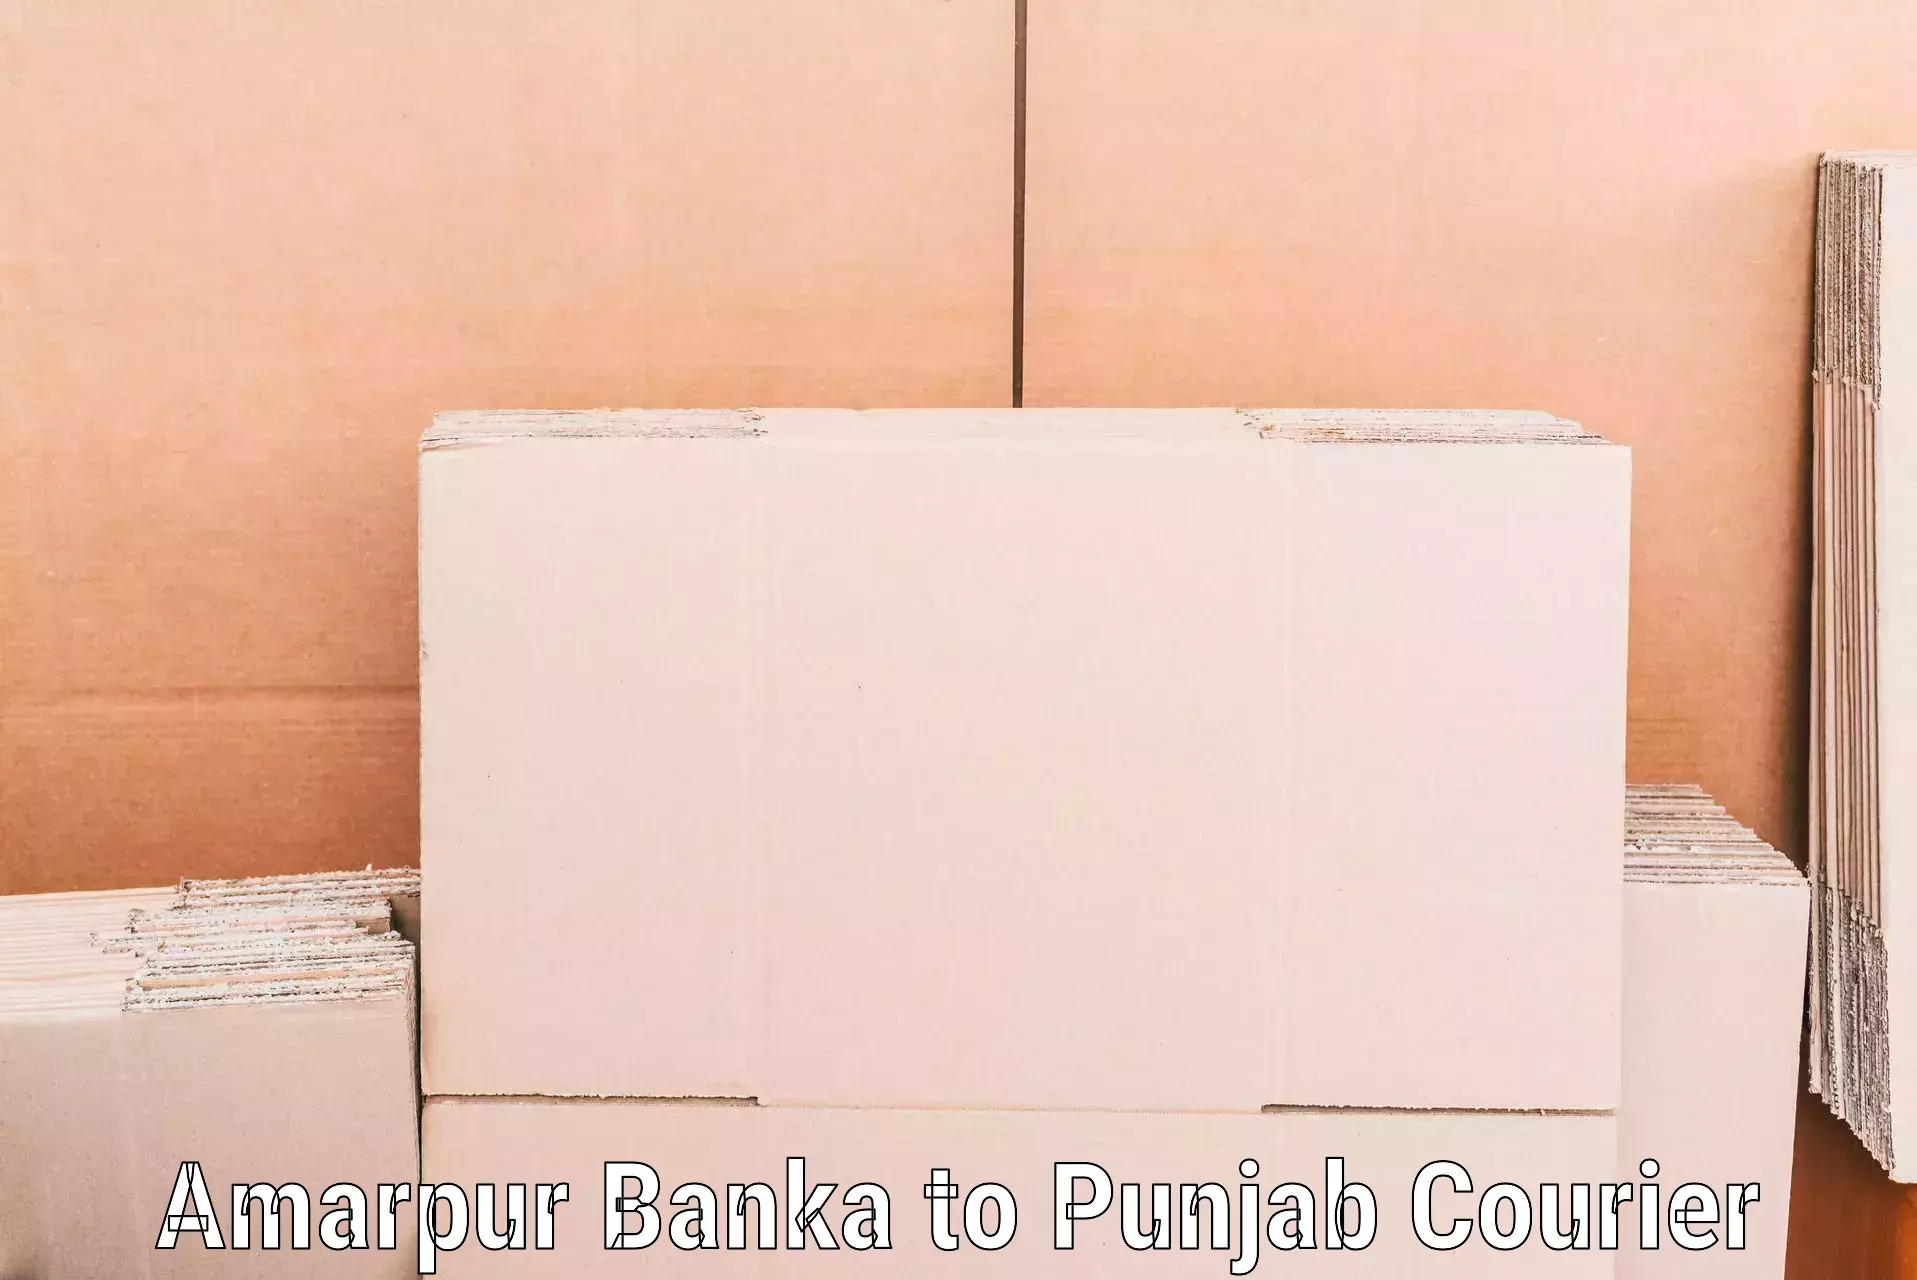 Furniture moving specialists Amarpur Banka to Mohali